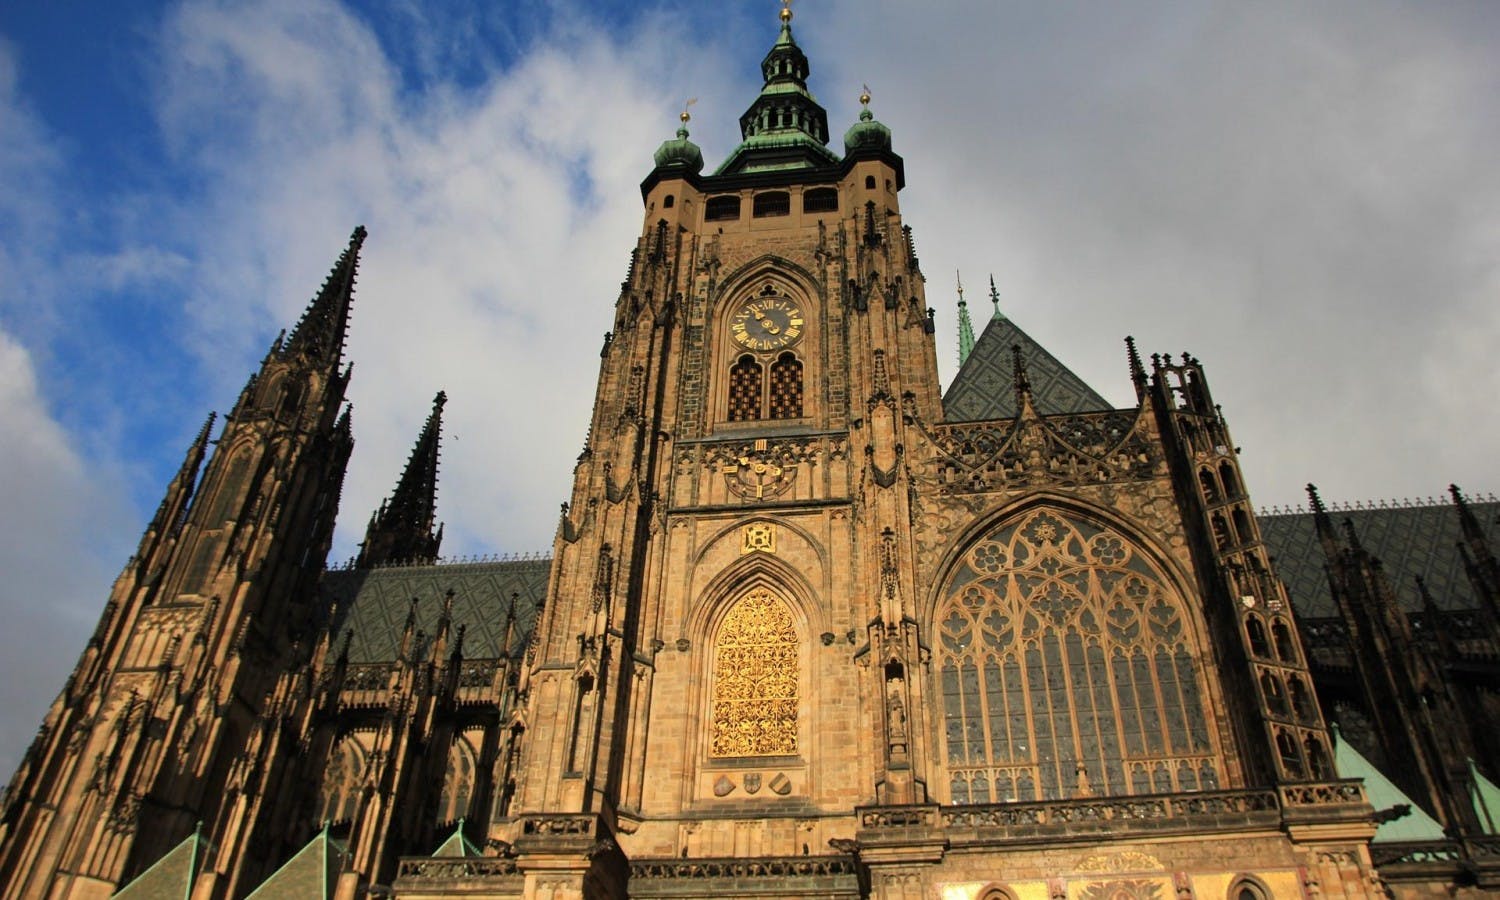 Prague full day sightseeing tour with river cruise and lunch8.jpg